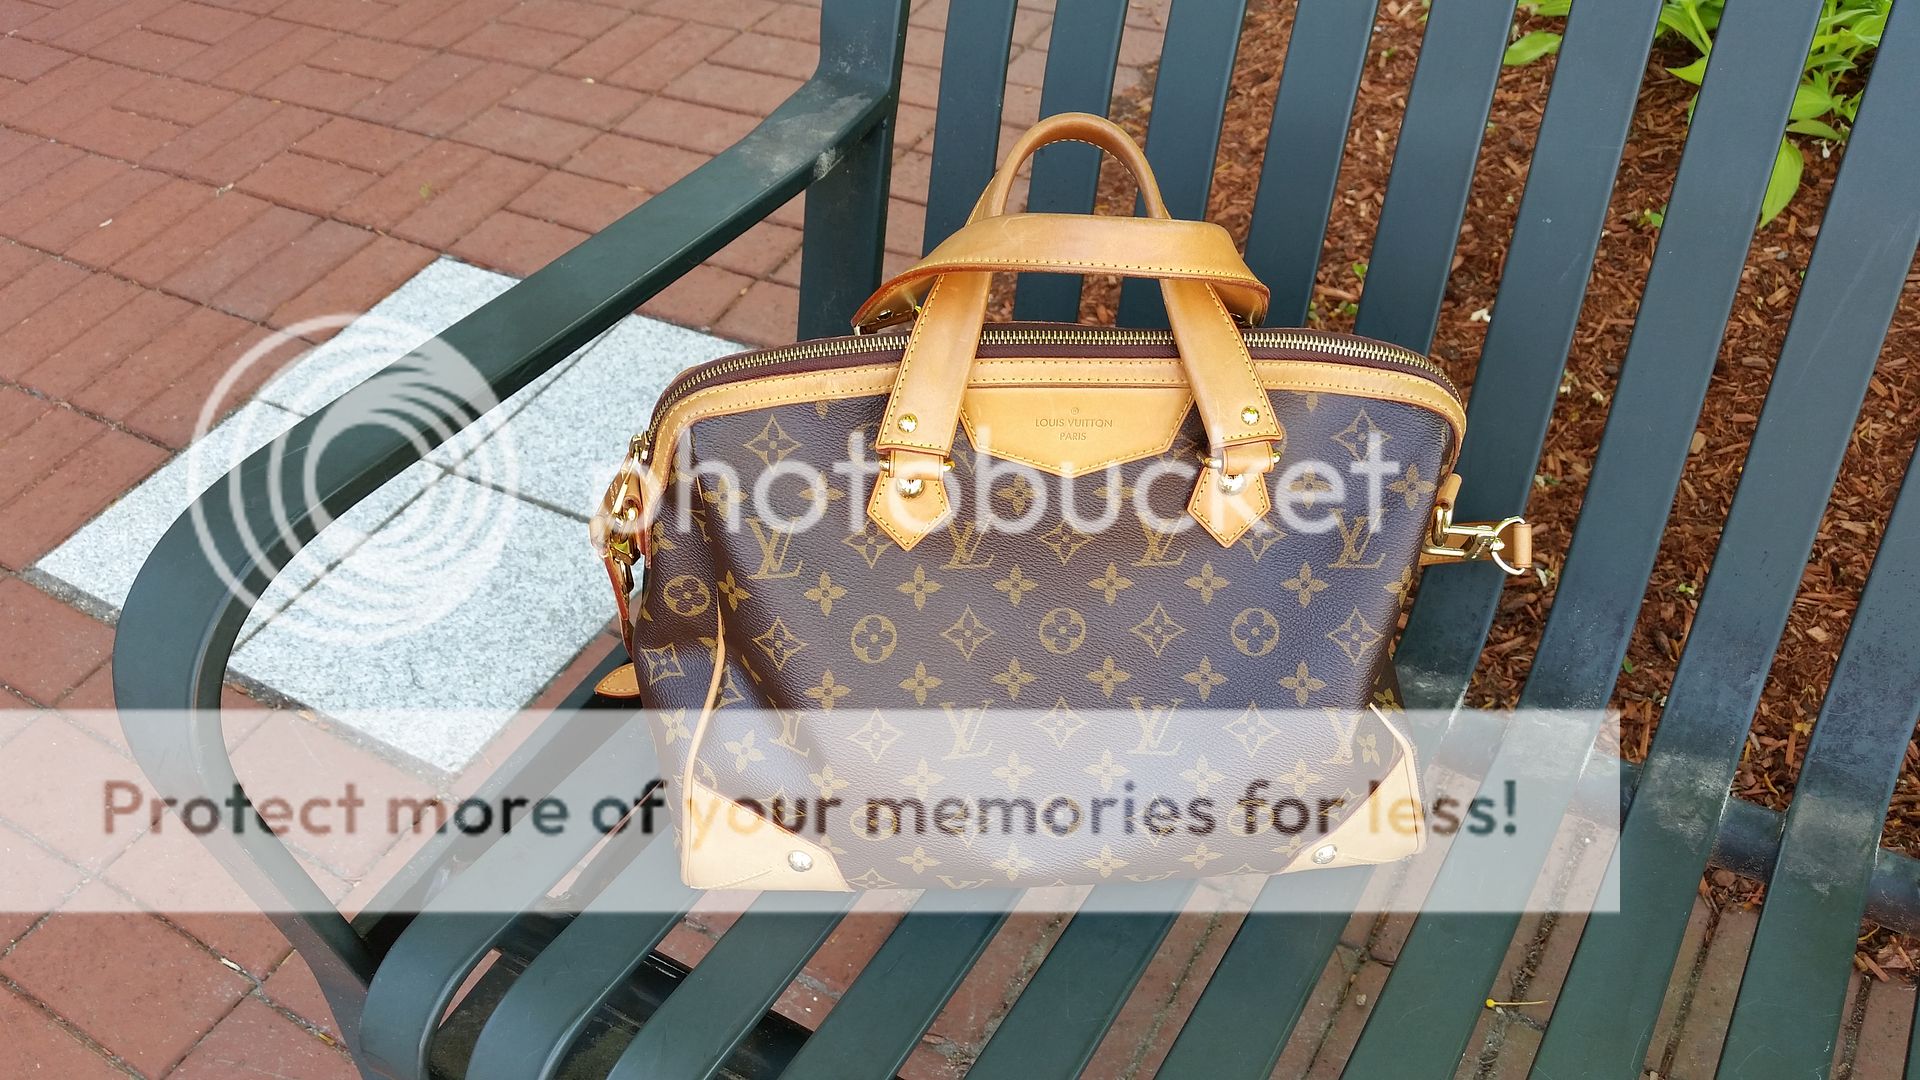 How To Get An Even Patina On Your Louis Vuitton